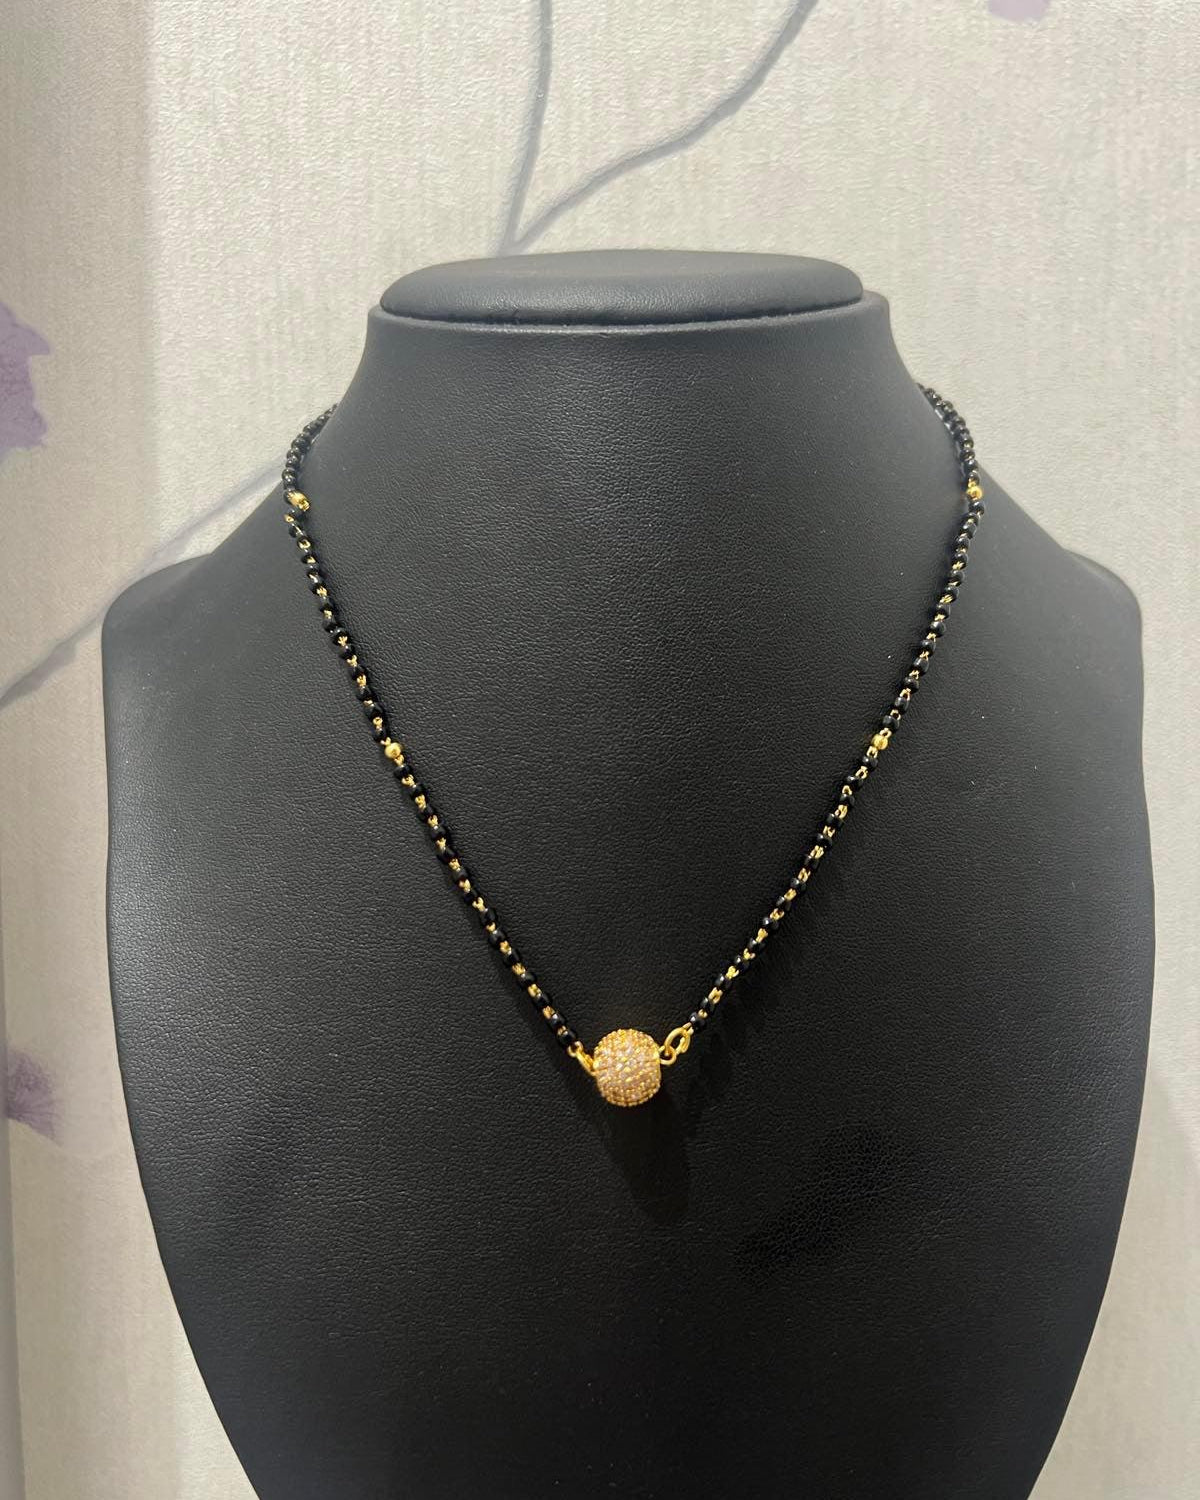 Ball Chain Mangalsutra Necklace - Boutique Nepal